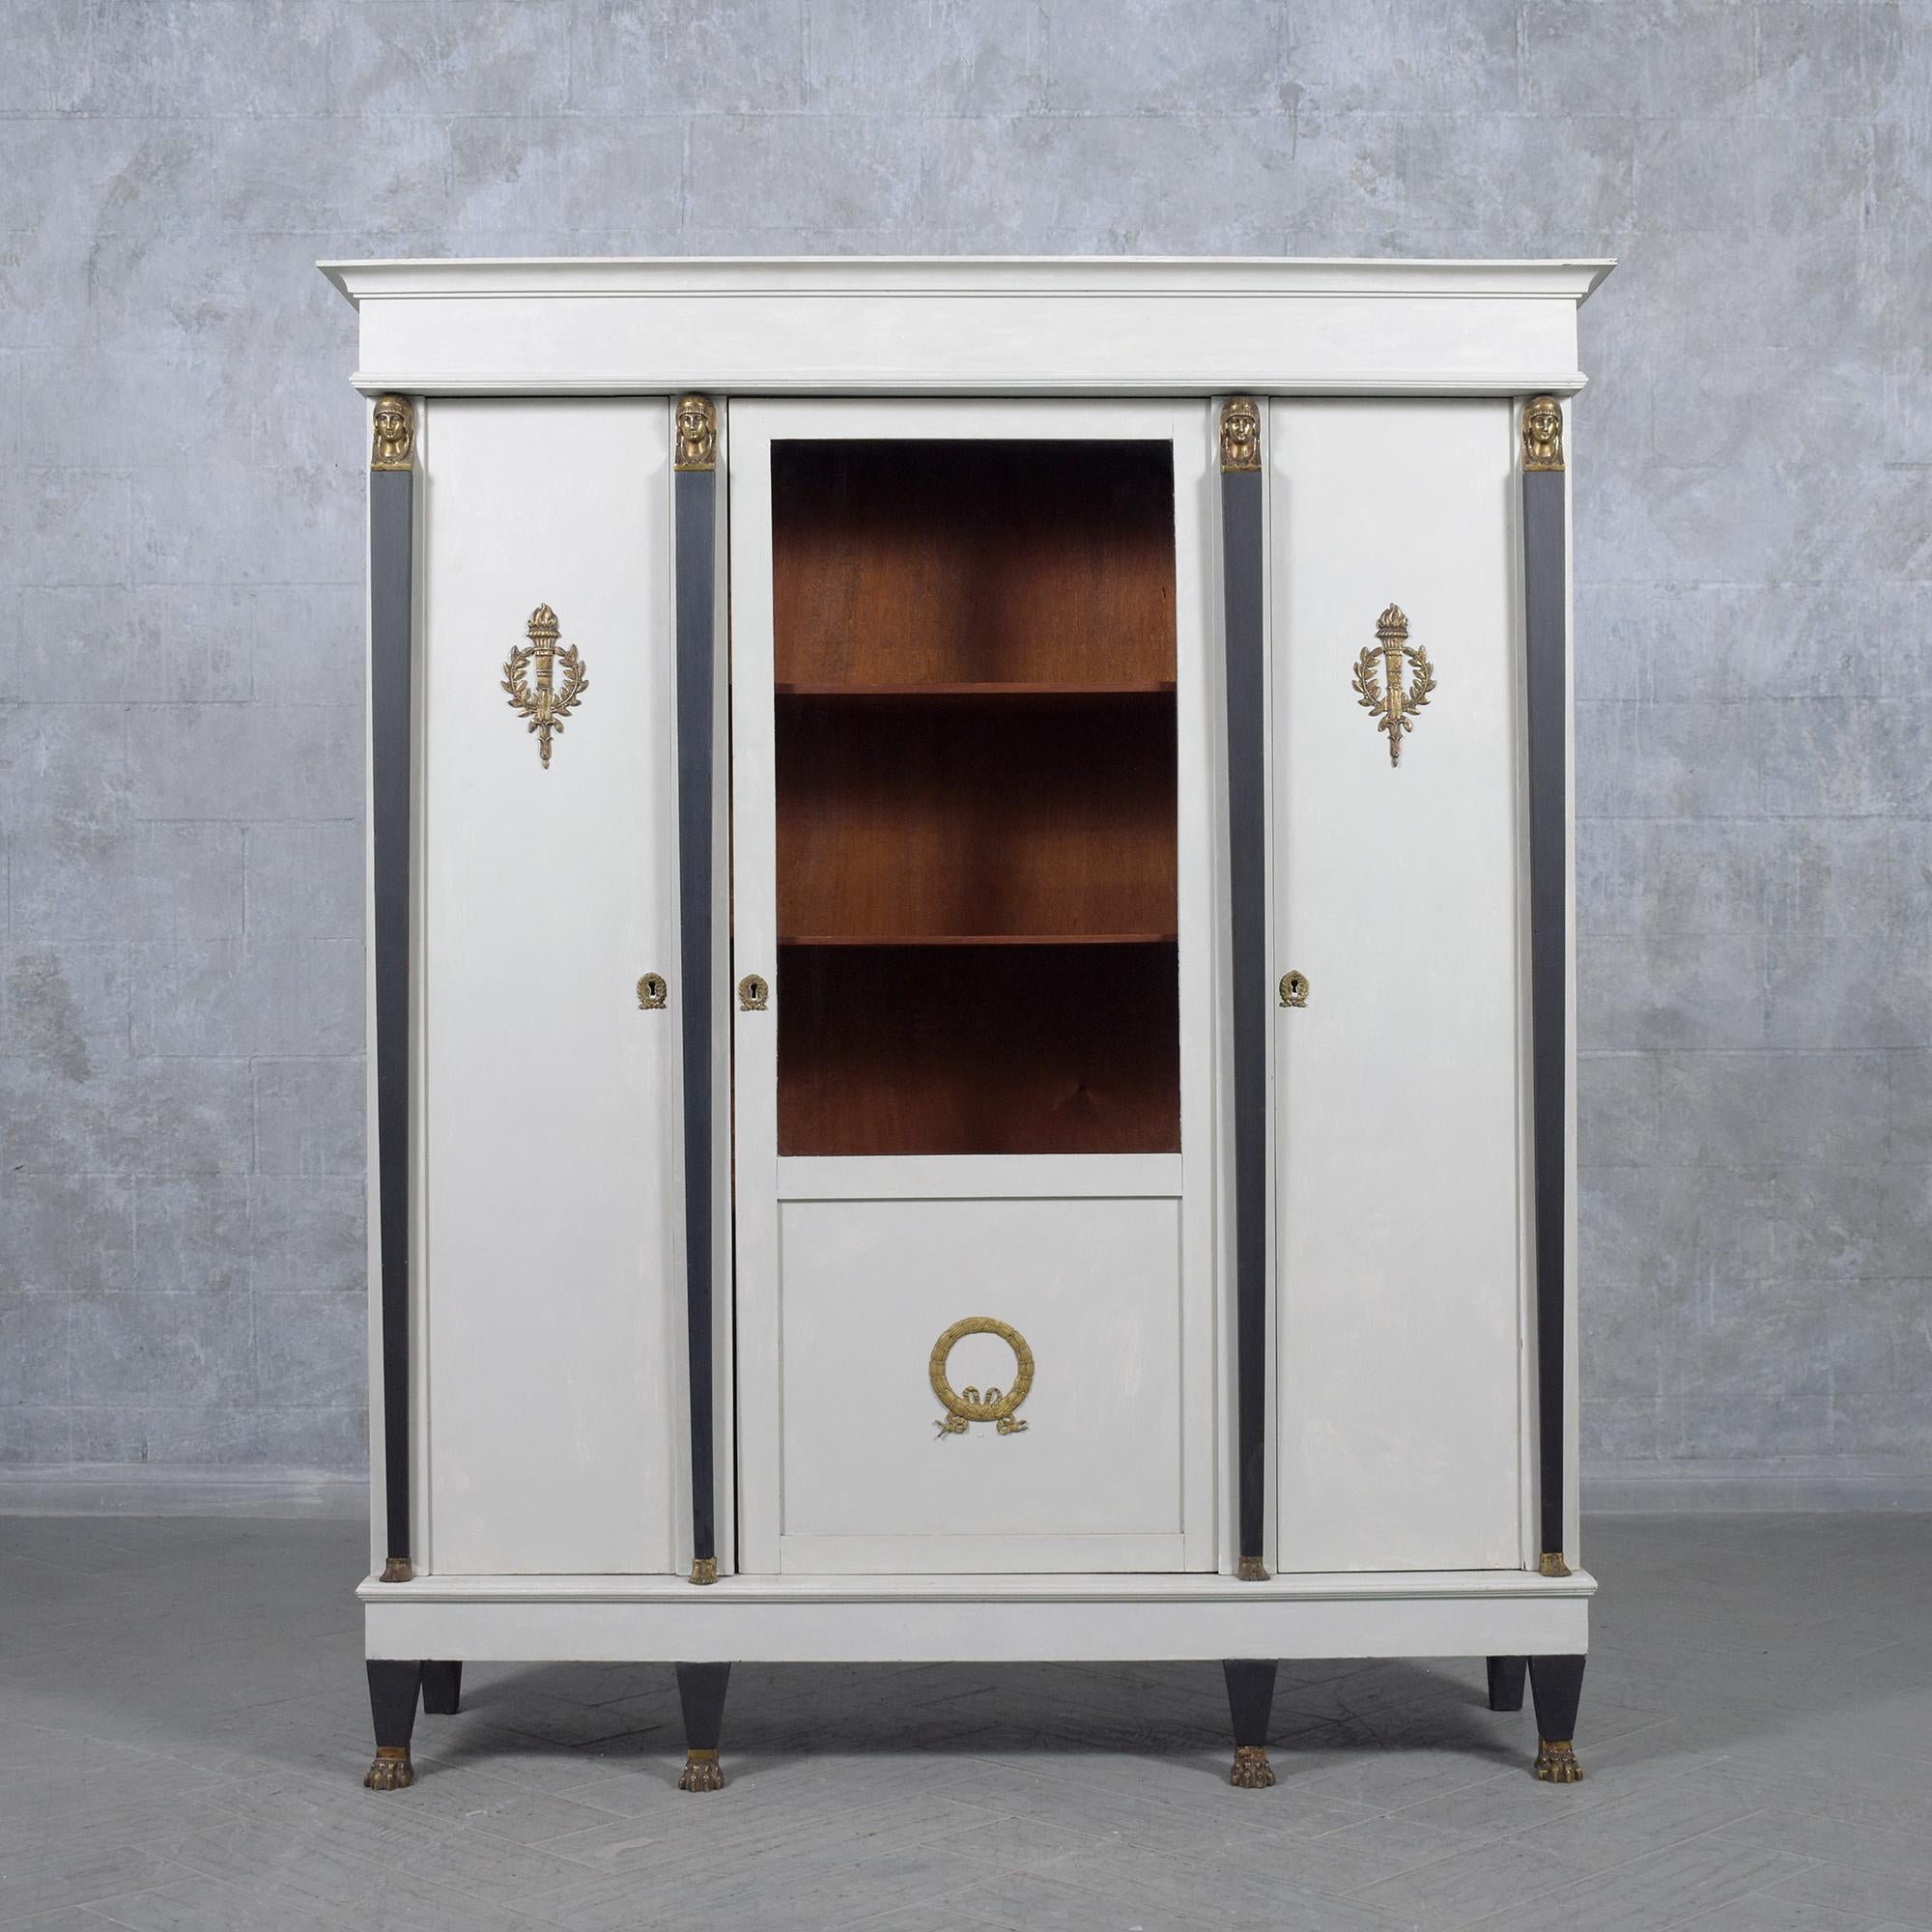 Discover the grandeur of our French Empire bookcase, a testament to the artistry and craftsmanship of a bygone era. Expertly handcrafted from mahogany wood and adorned with brass and glass, this antique piece has been meticulously restored and